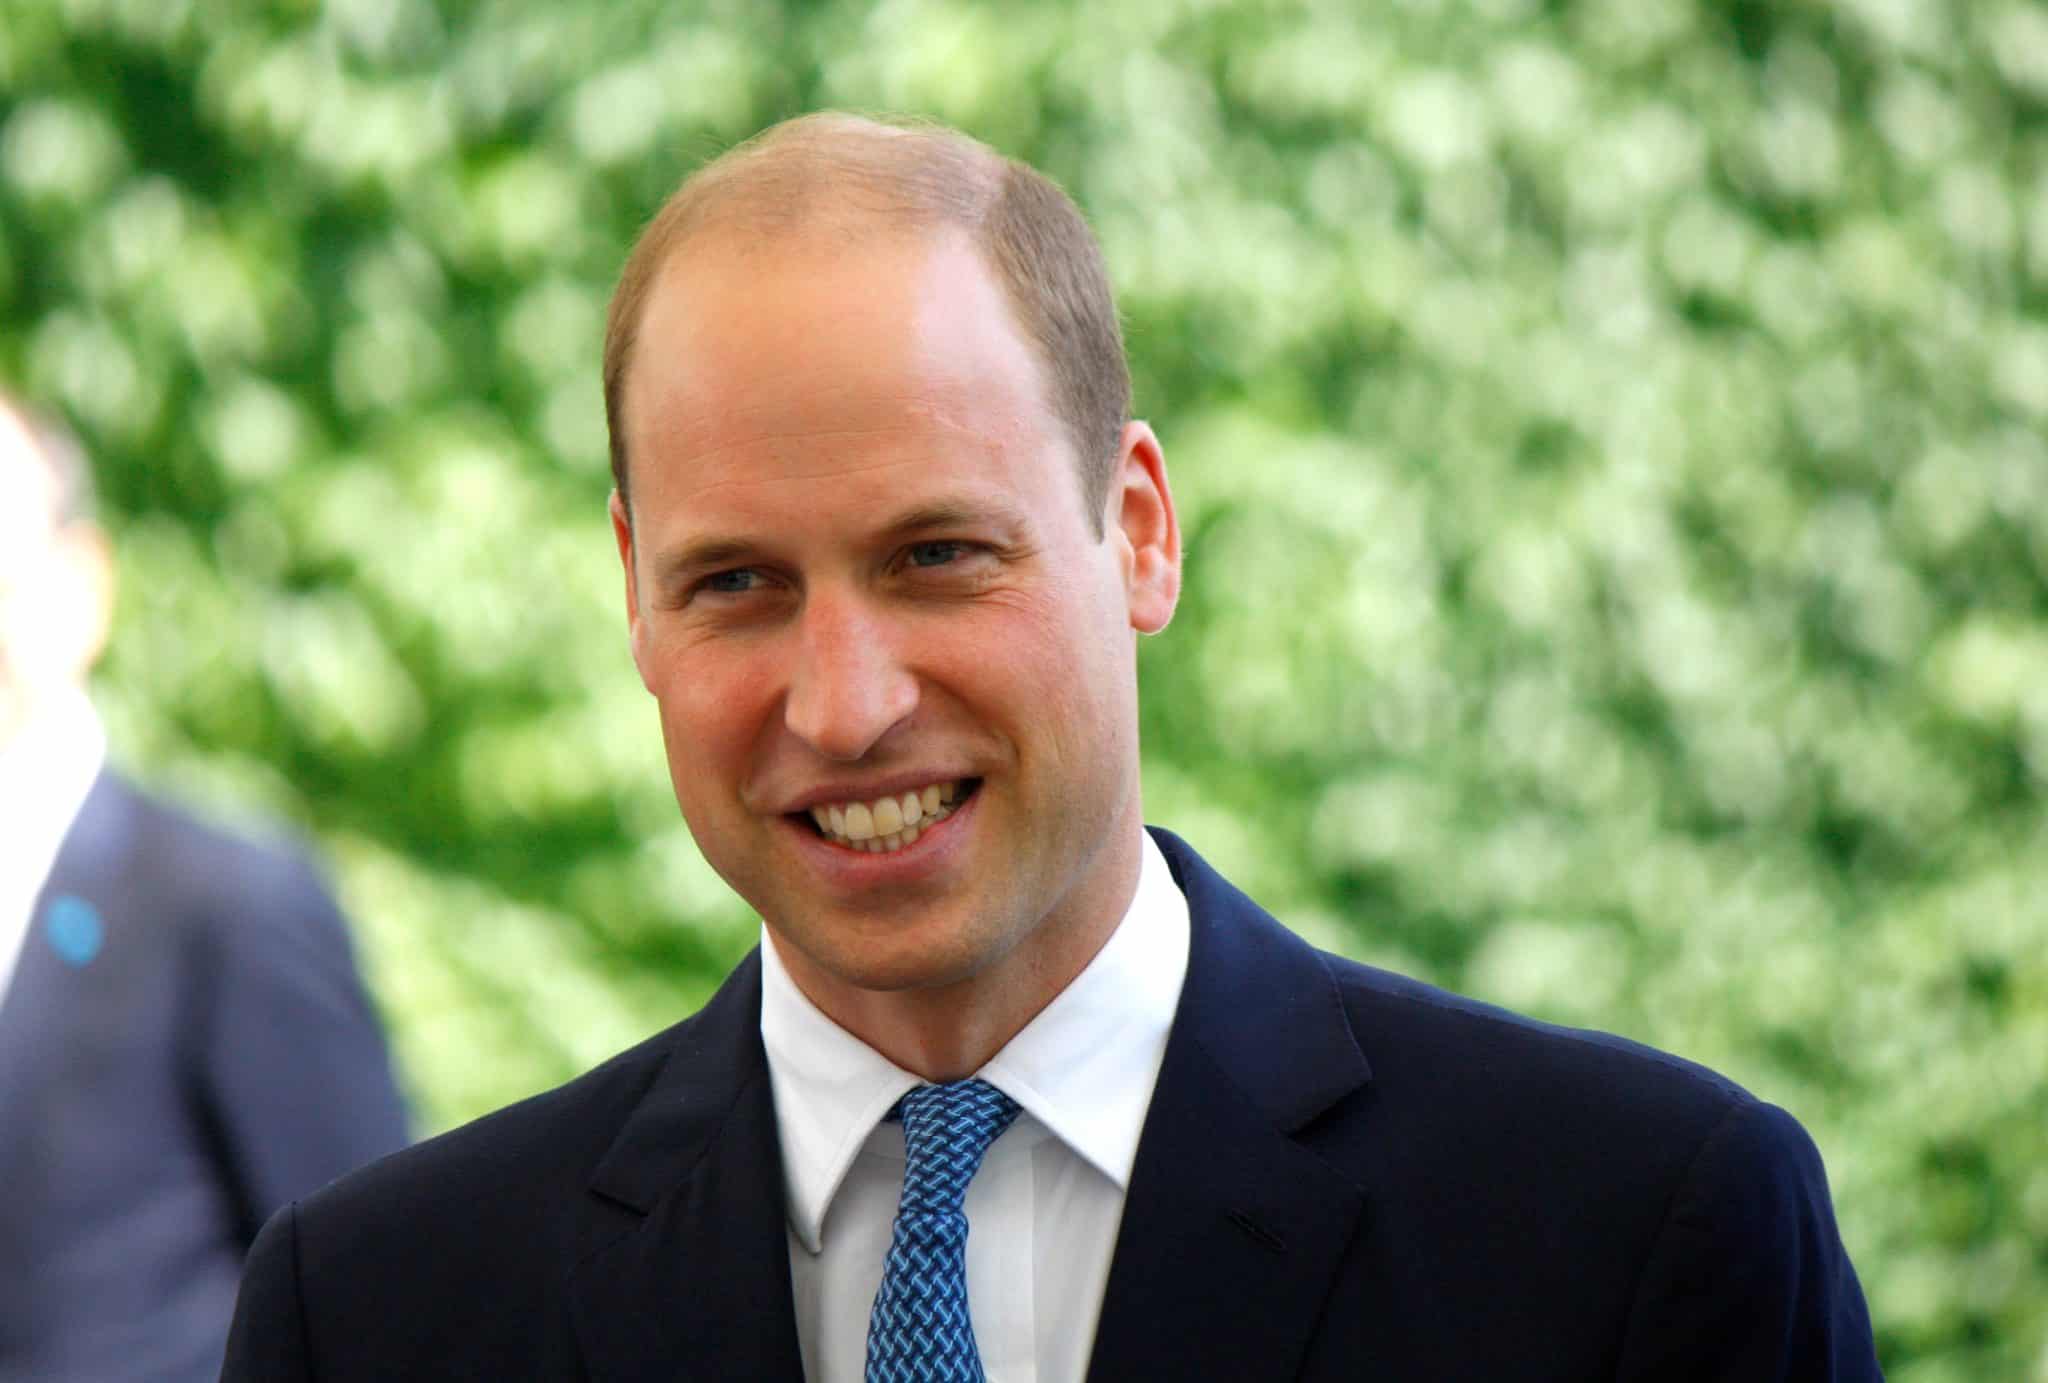 What Is Prince William's Net Worth? Find Out More About the Future King's Wealth